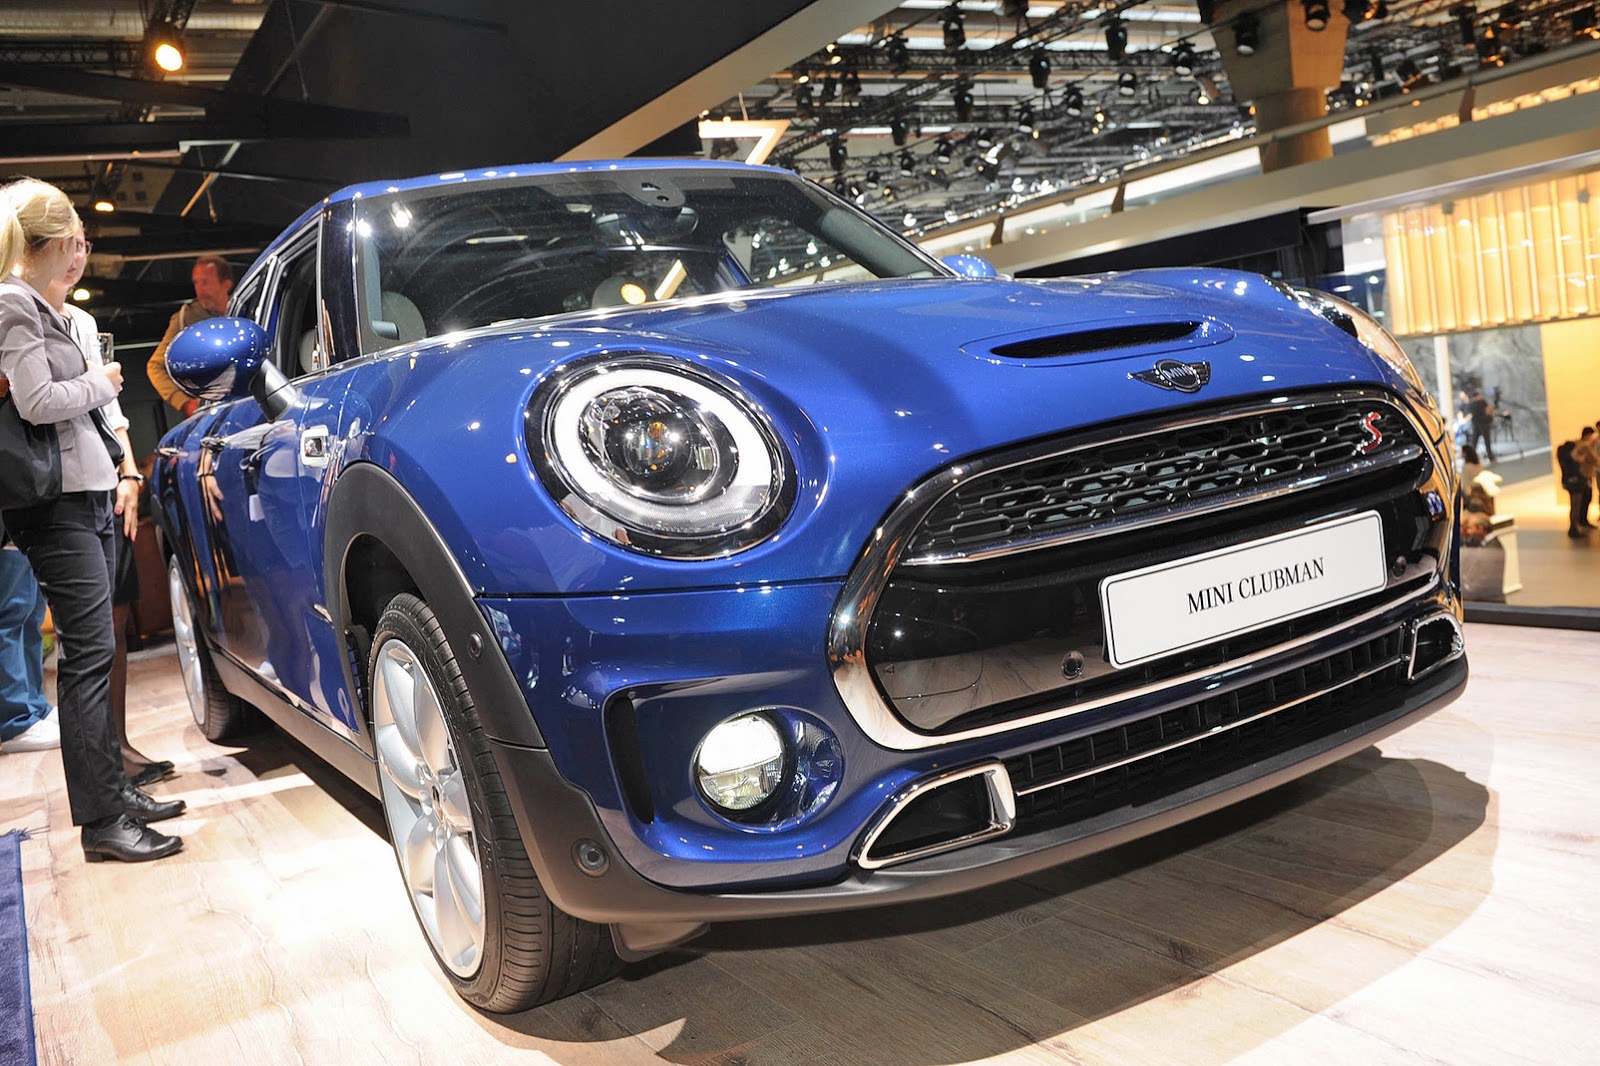 New MINI Clubman Shows All Six Doors In Live Photo Gallery | Carscoops